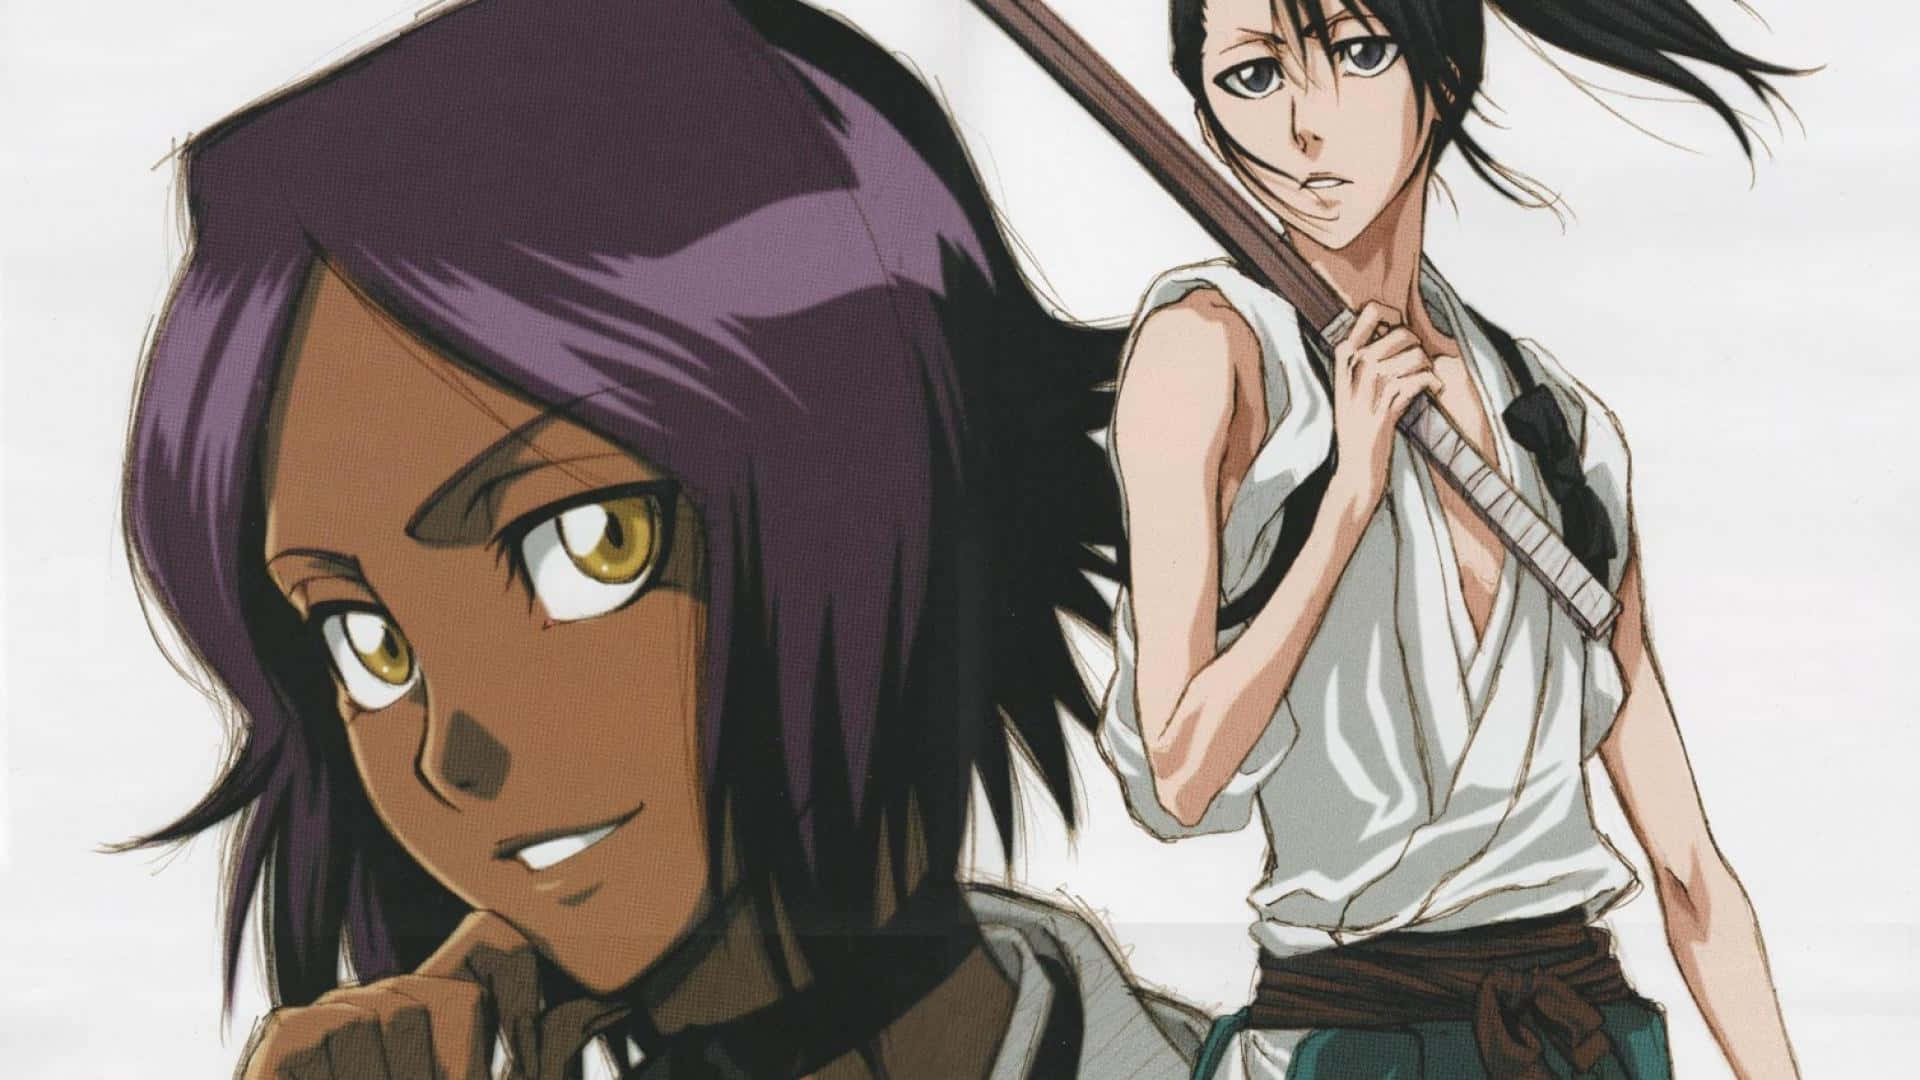 Yoruichi Shihoin looking determined and capable Wallpaper